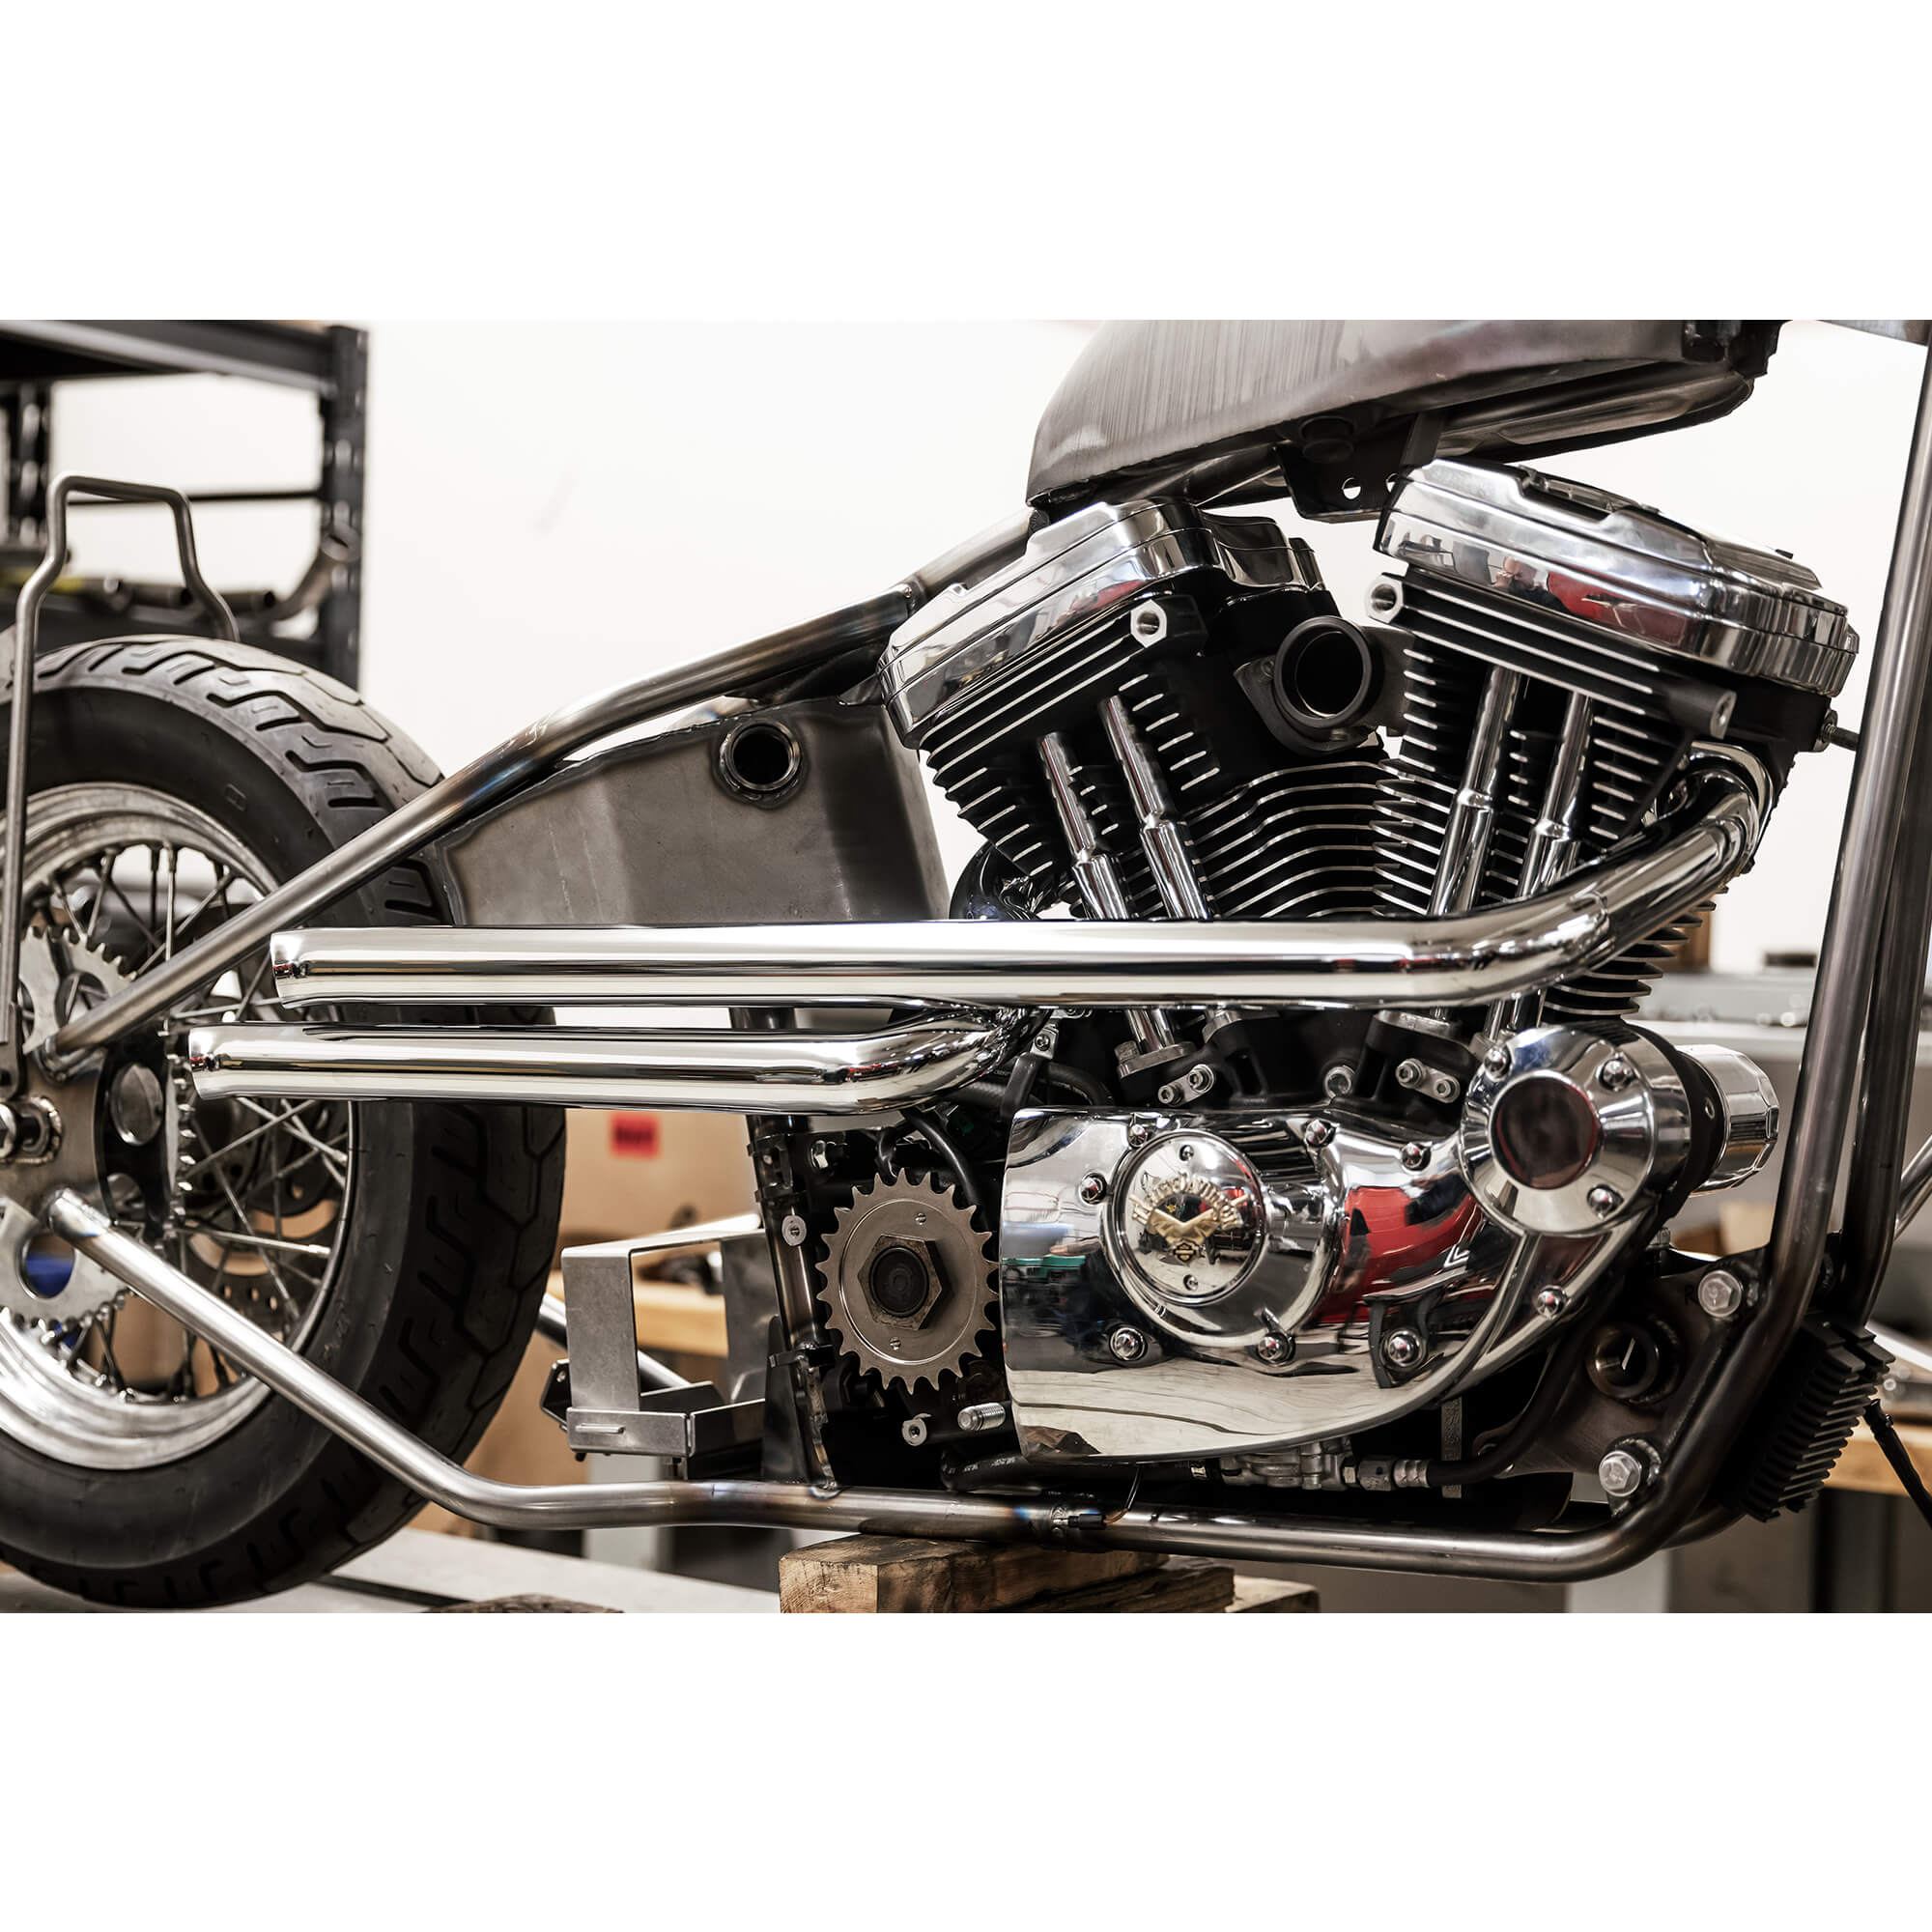 Best Harley Sportster Exhaust Pipes – Blow Performance Exhausts